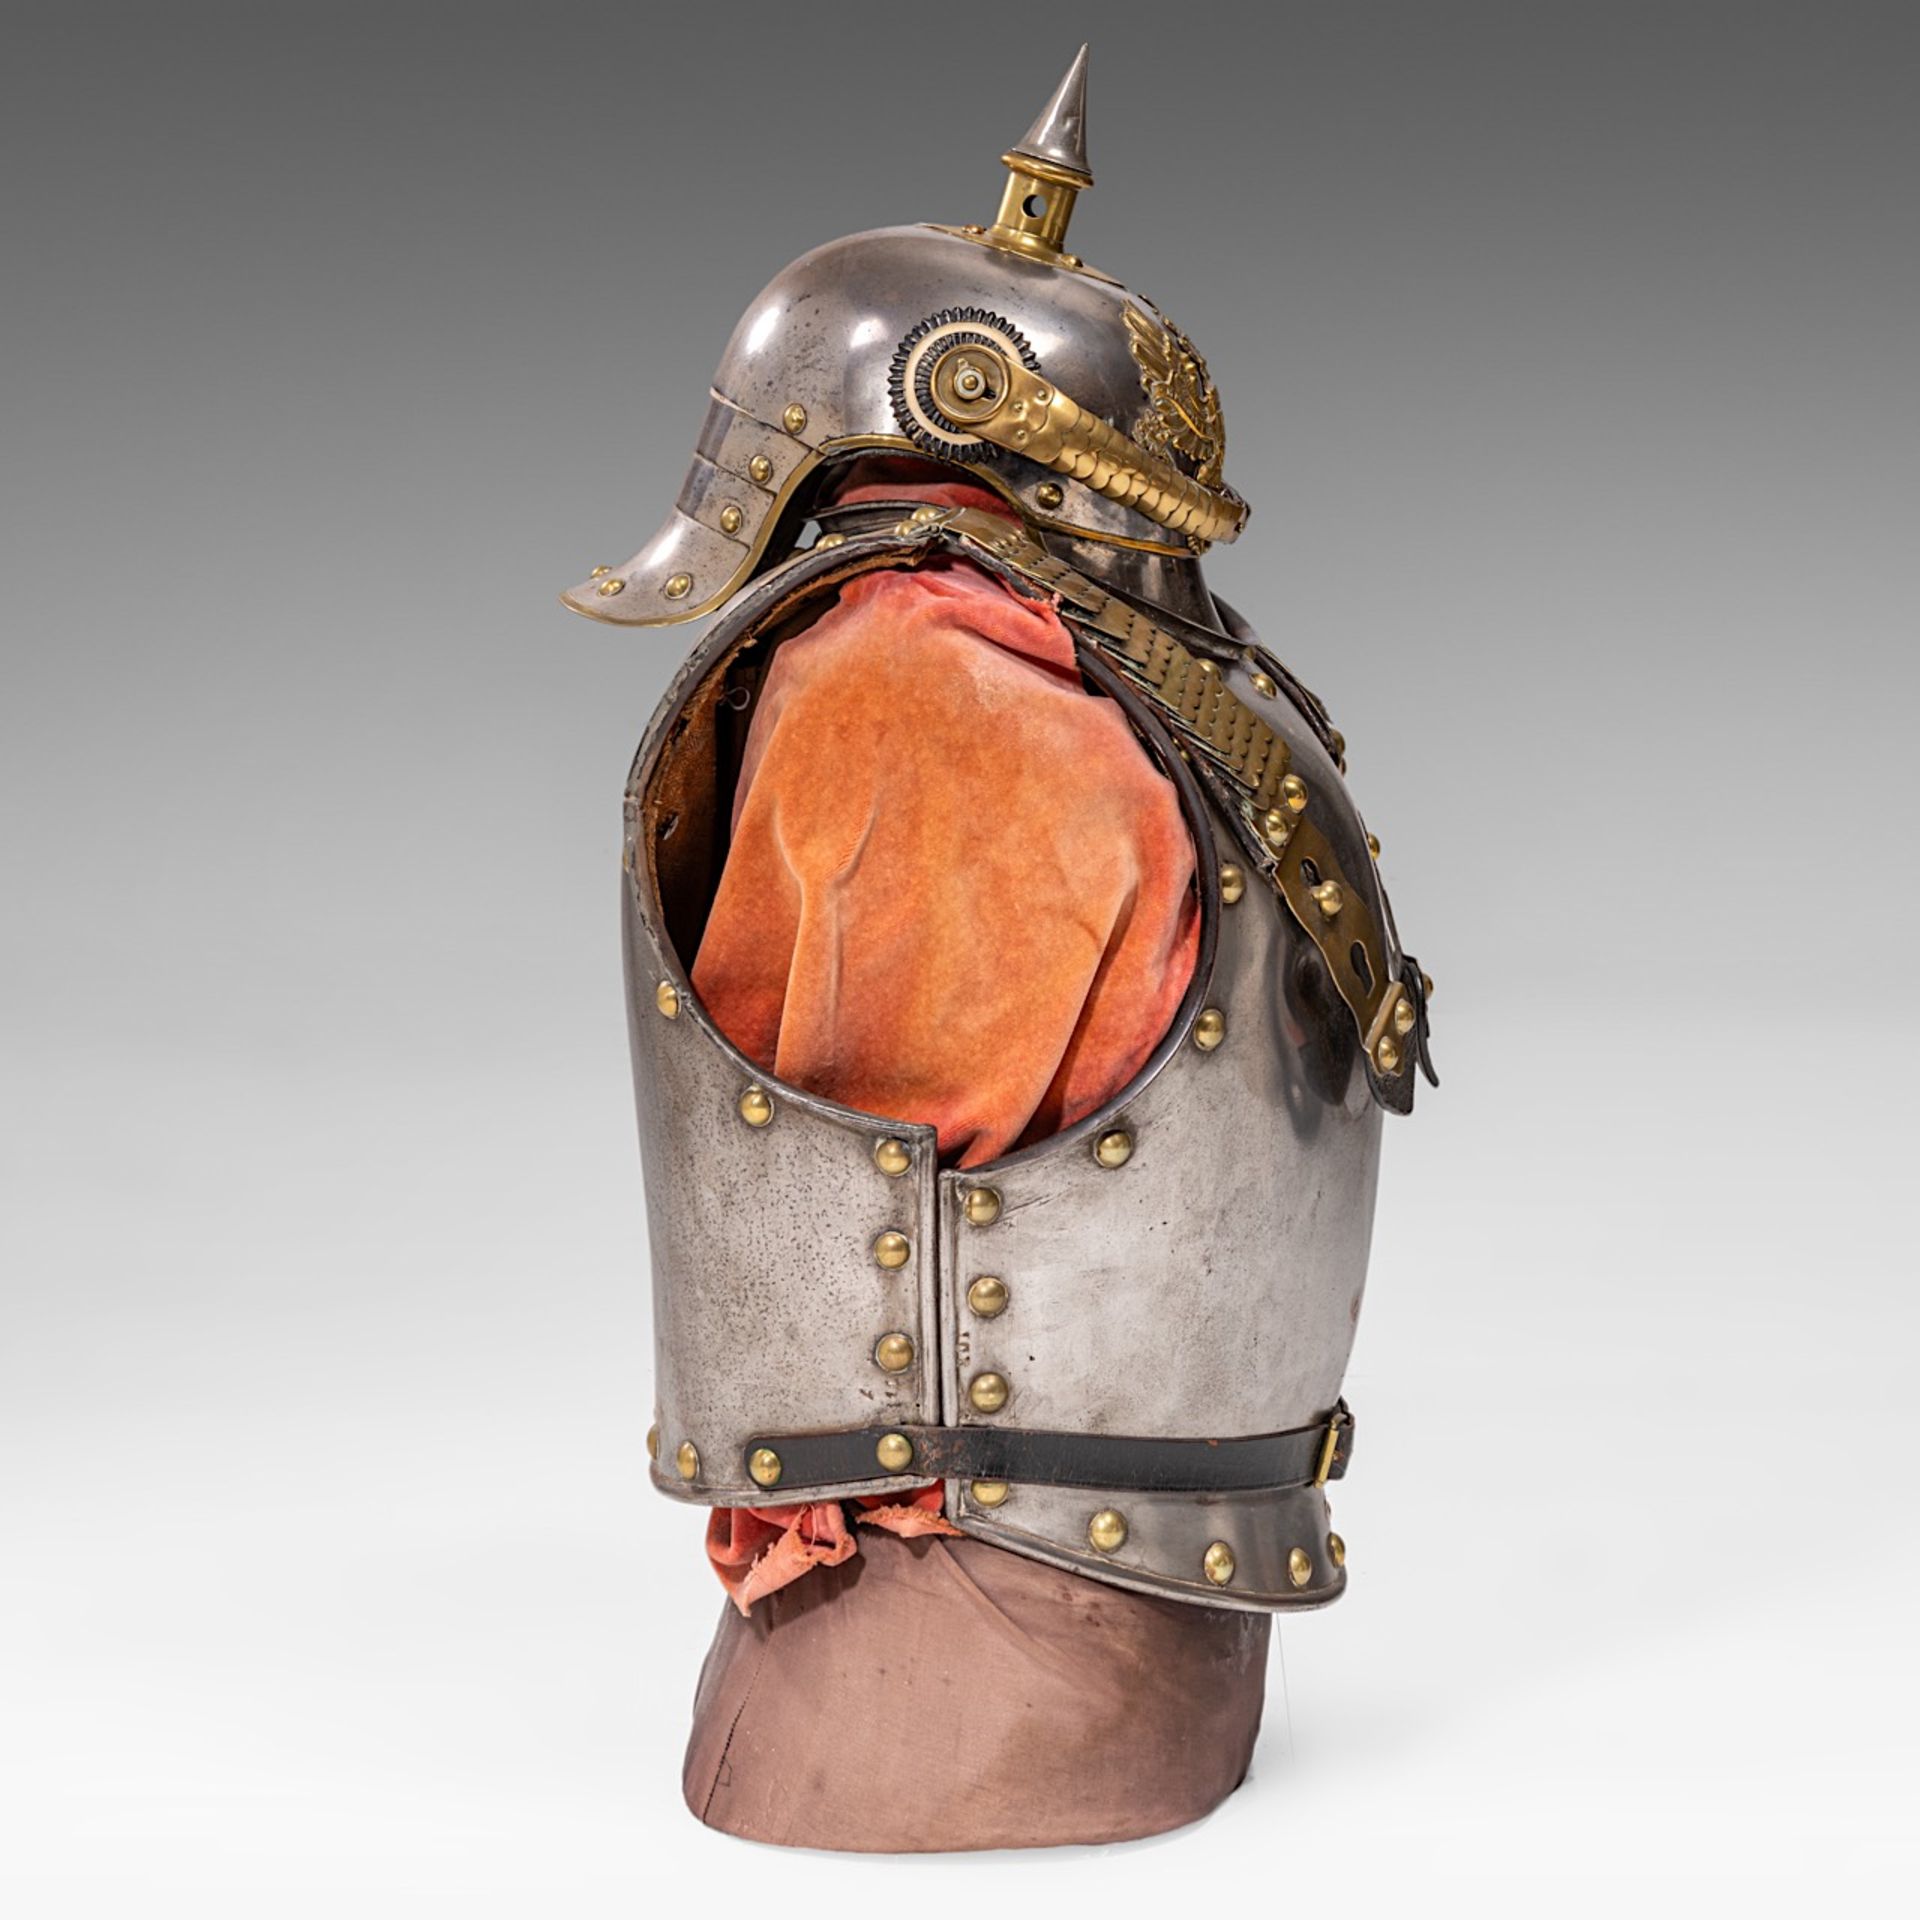 Cuirass and helmet, metal and gilded brass, 19thC., 68 x 30 x 36 cm. (26.7 x 11.8 x 14.1 in.) - Image 6 of 8